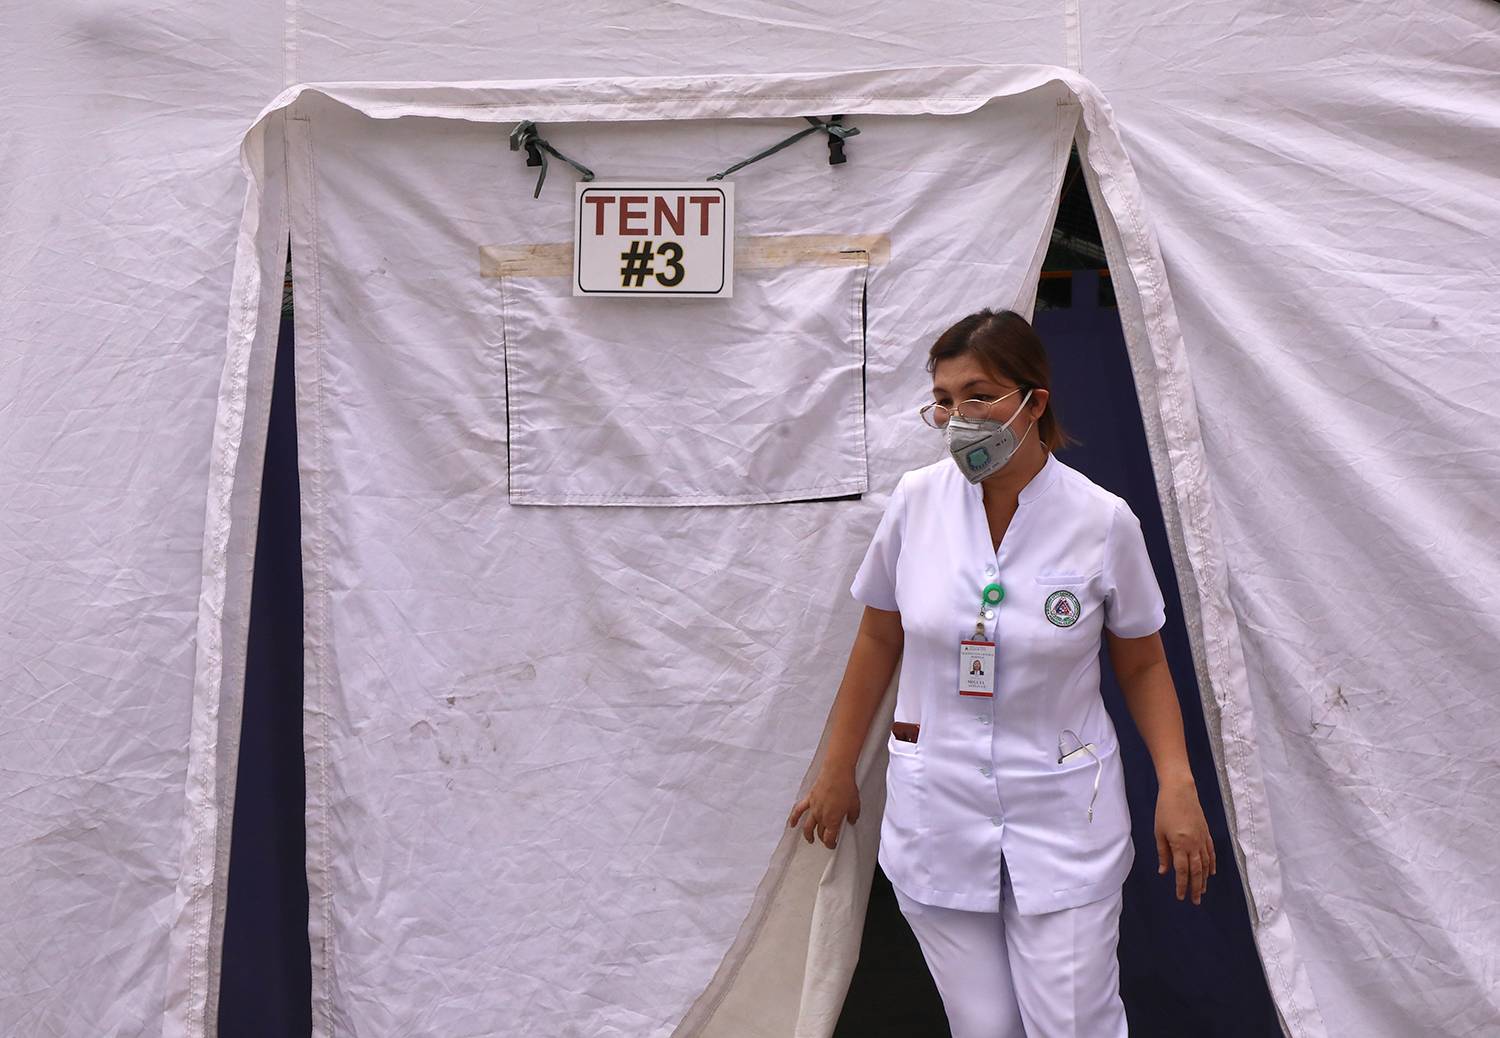 PANDEMIC. A health worker at the Quezon City General Hospital prepares an solation tent for novel coronavirus patients on Tuesday, March 10, 2020. Photo by Darren Langit/Rappler 